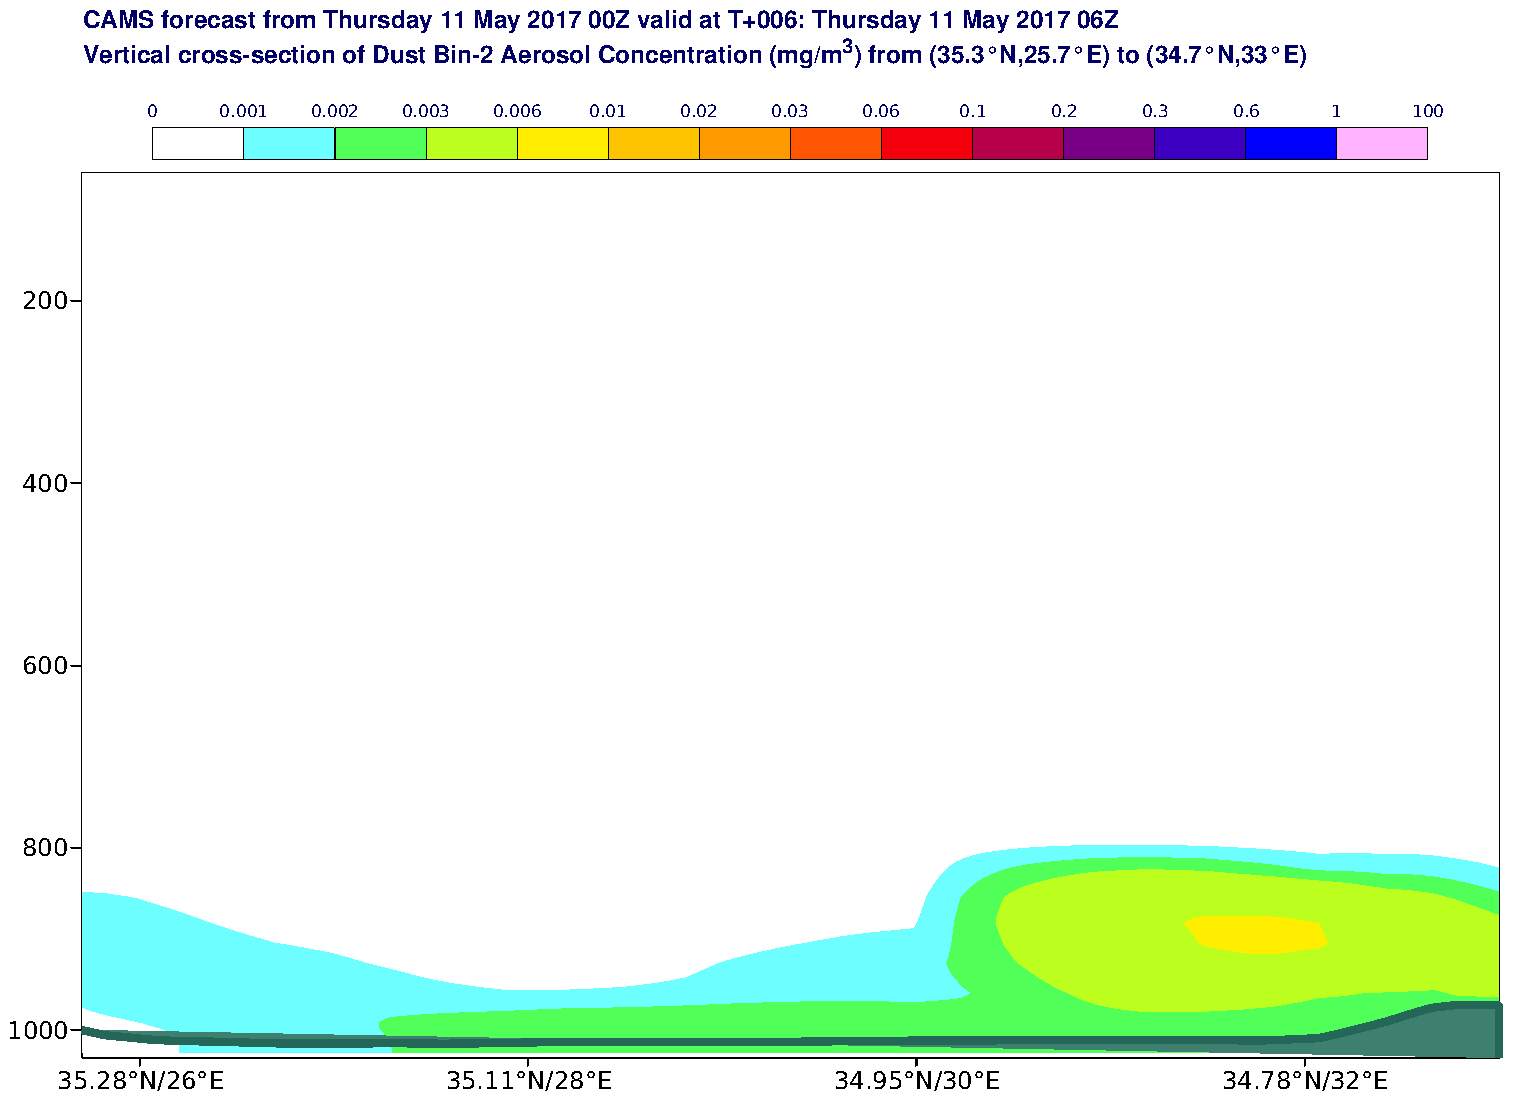 Vertical cross-section of Dust Bin-2 Aerosol Concentration (mg/m3) valid at T6 - 2017-05-11 06:00